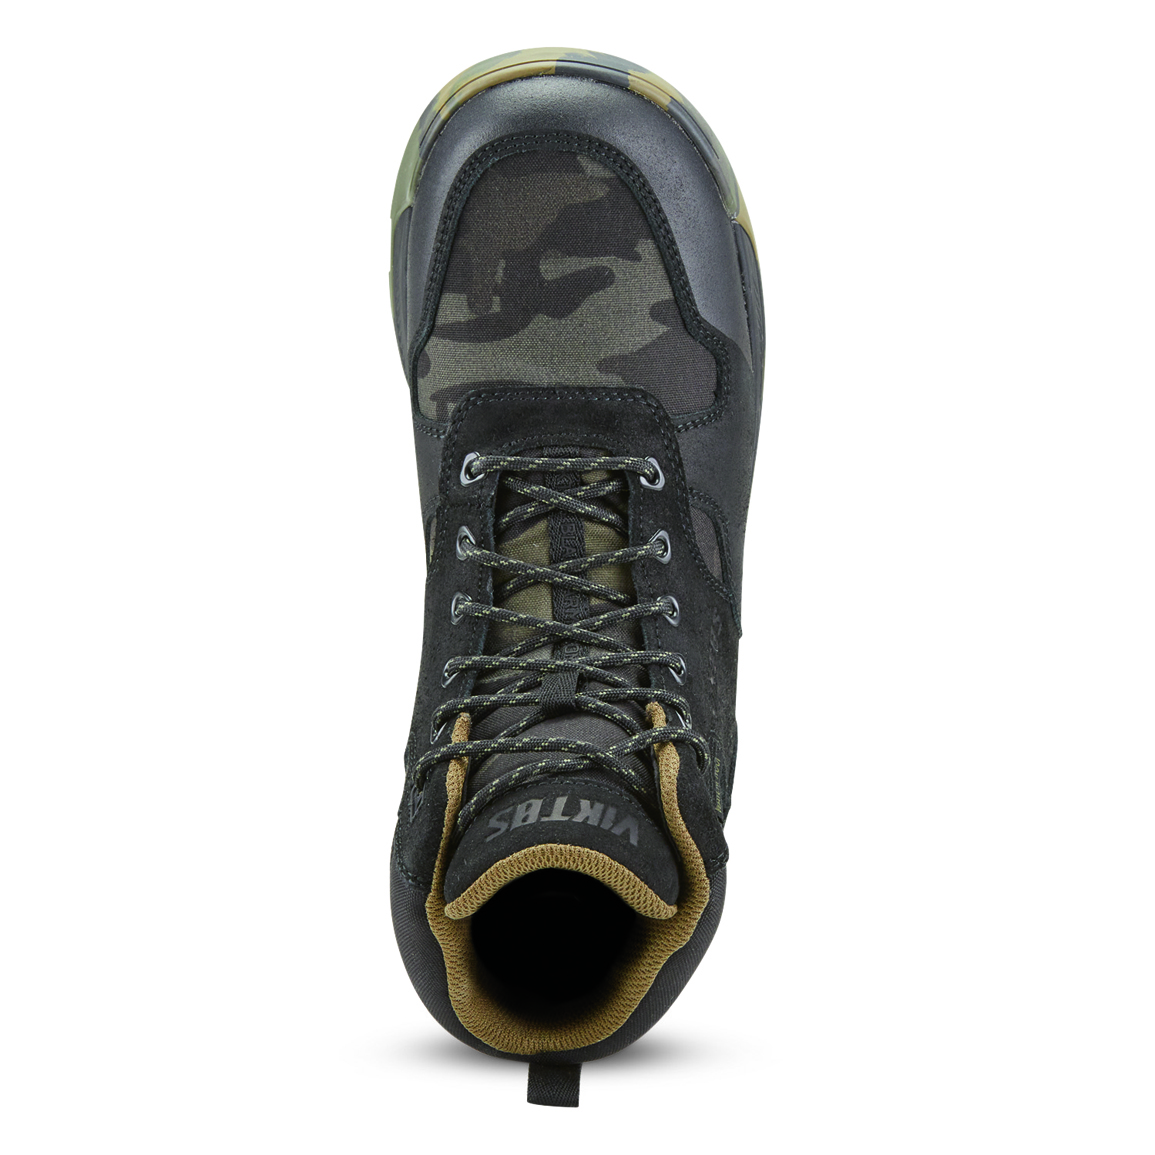 Wide forefoot for extra support under heavy loads, Multicam® Black